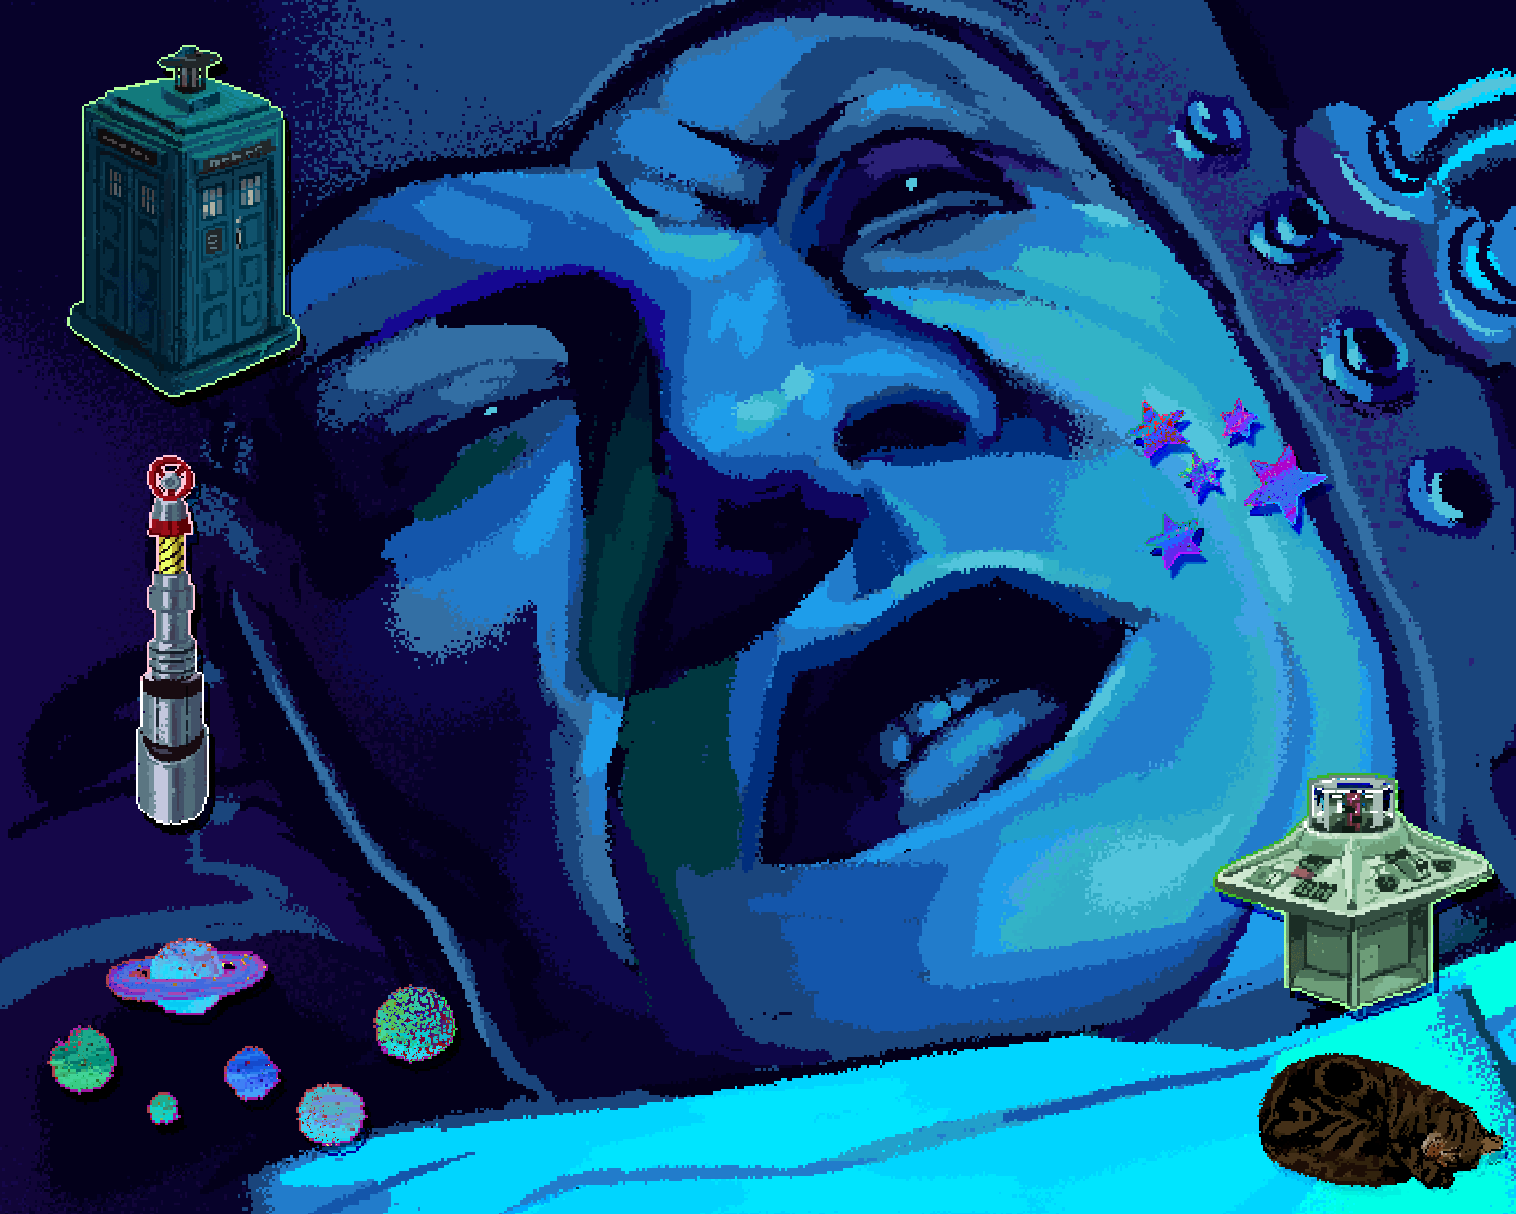 Pixel art drawing from the Doctor Who episode 'Ambassadors of Death'. It shows a blue-tinted scene of a closeup of the third Doctor's face as he is traveling into space via a 1969 British rocket. He is making a face of slight pain. There are also fake 'stickers' on top of the image showing stars, planets, the TARDIS, the TARDIS console, my cat sailor the tabby sleeping, and the sonic screwdriver.